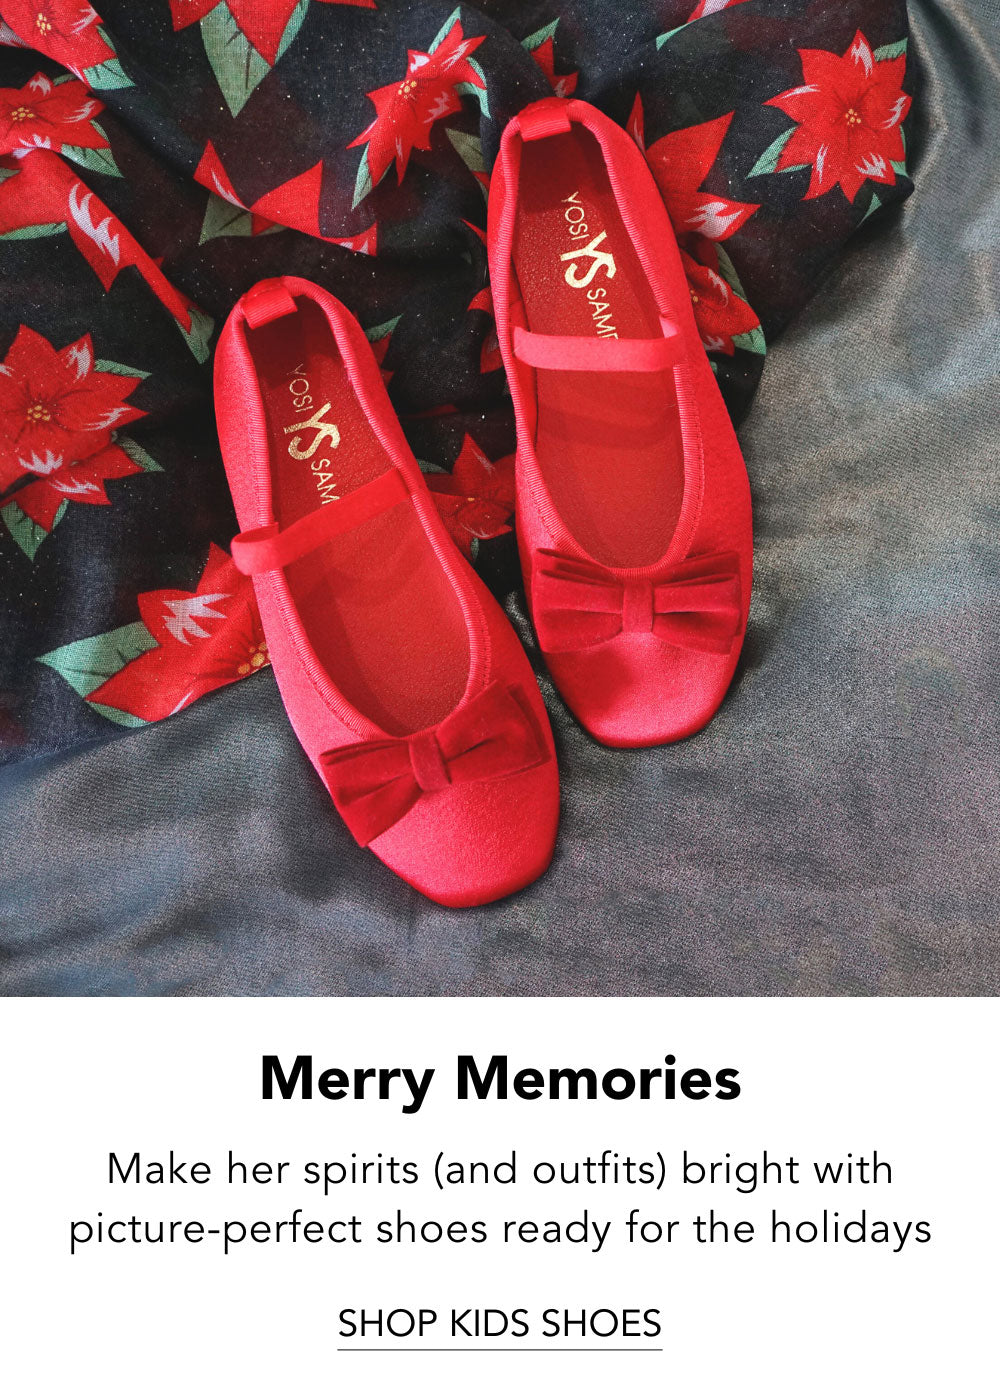 Merry Memories - Make her spirits (and outfits) bright with picture-perfect shoes ready for the holidays.